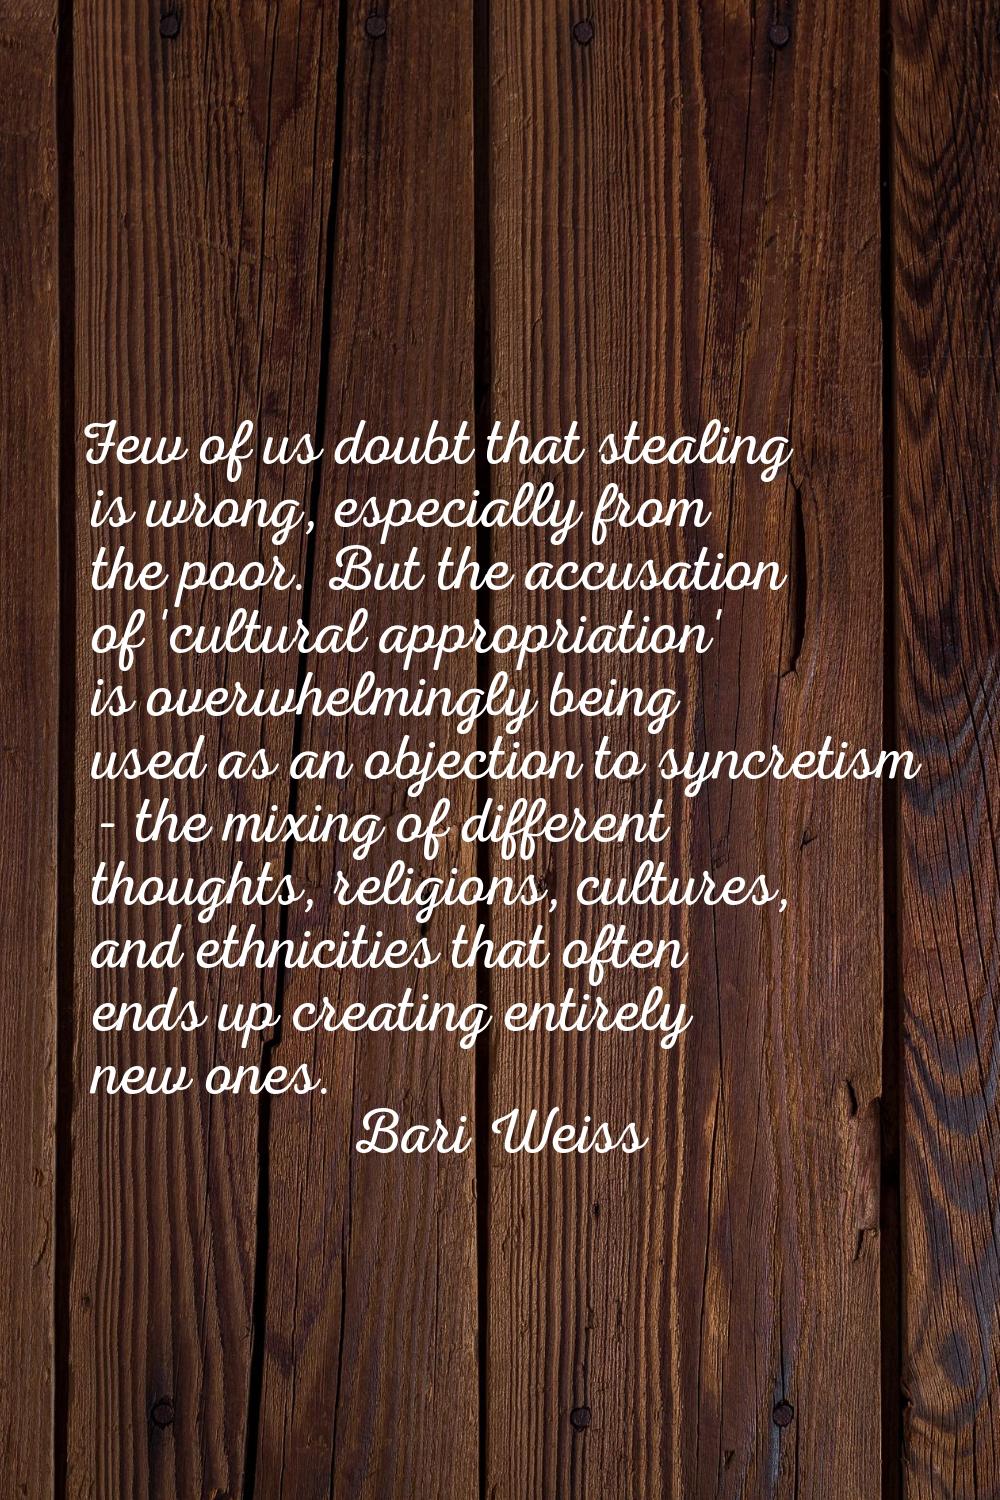 Few of us doubt that stealing is wrong, especially from the poor. But the accusation of 'cultural a